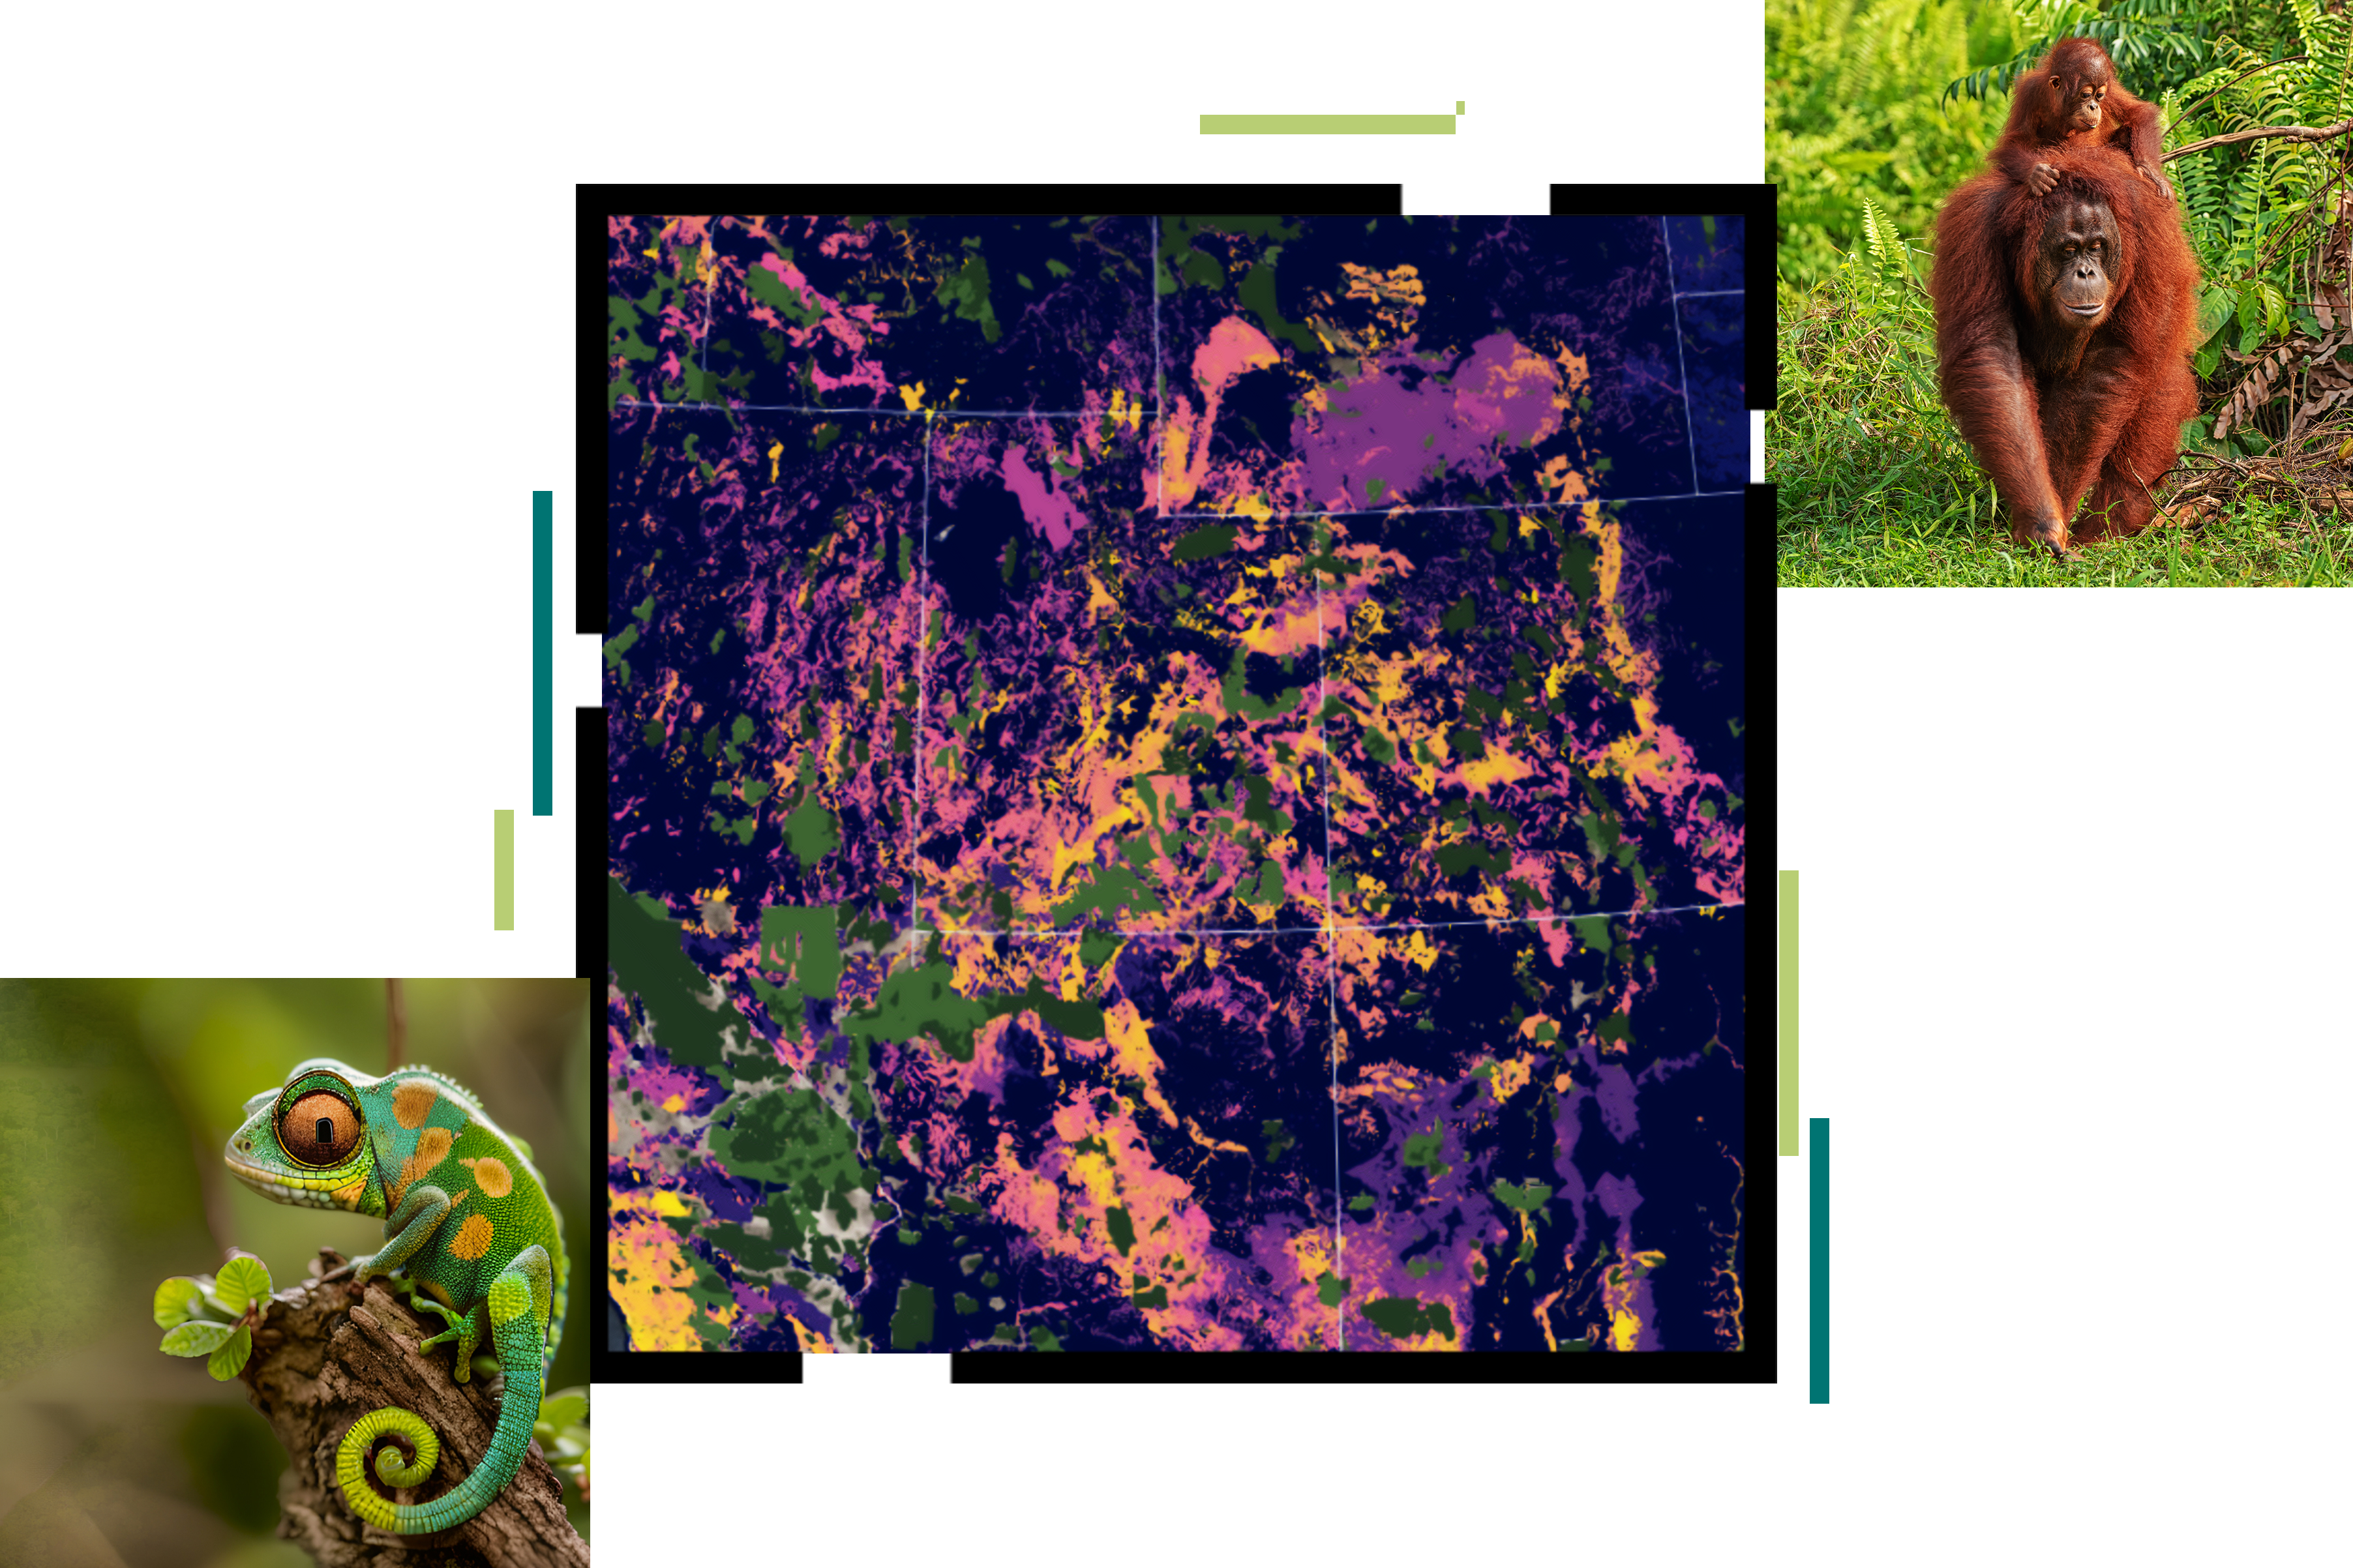 A collage with images of a chameleon, two orangutans, and a map with data shaded in purple, yellow, and green